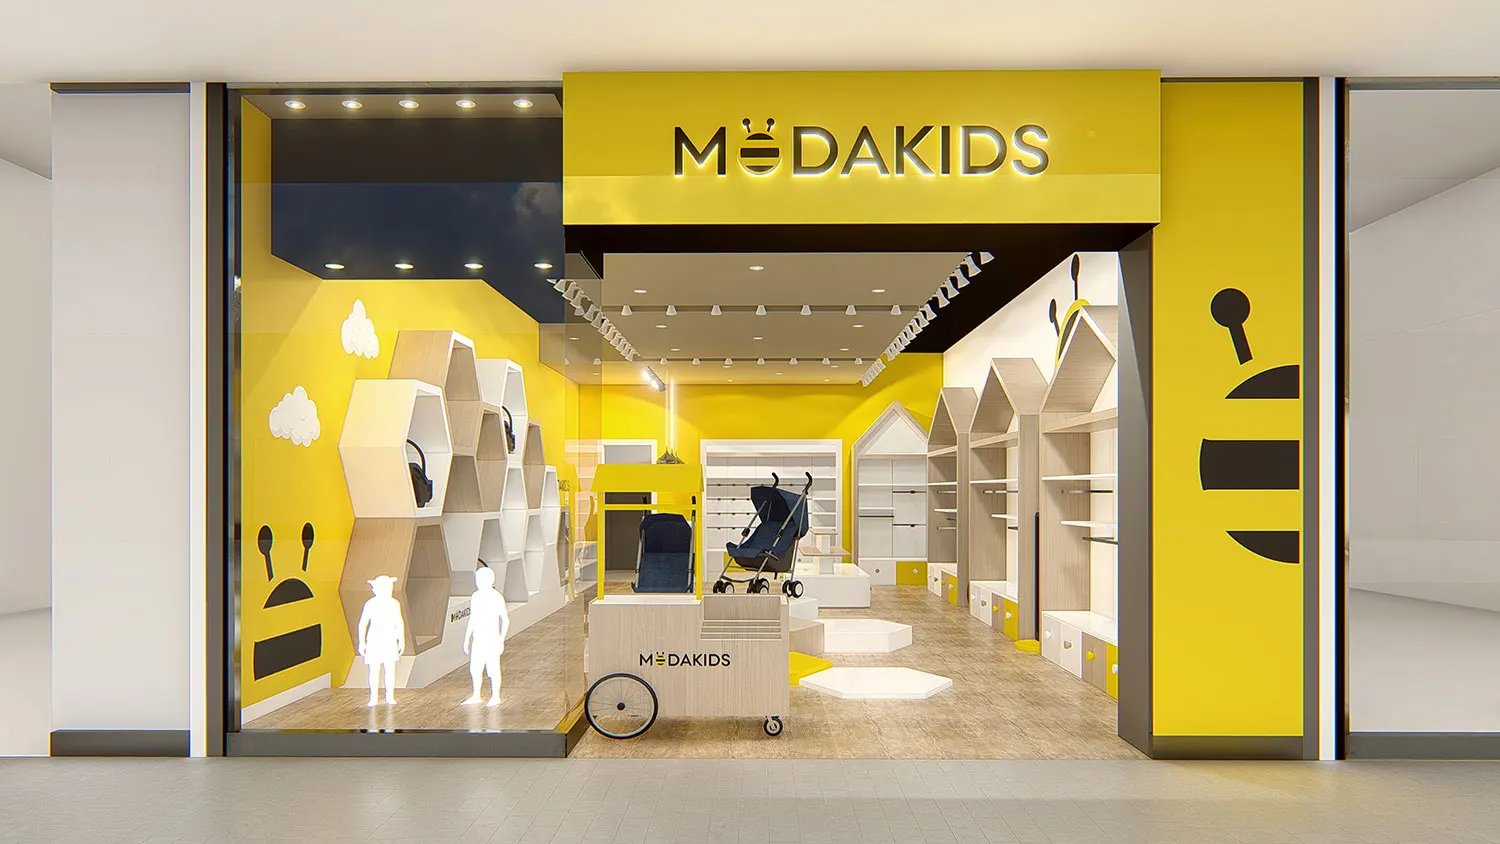 Exterior design project for Modakids. Designed storefront with 3D rendering present a sense of elegance from the playful theme